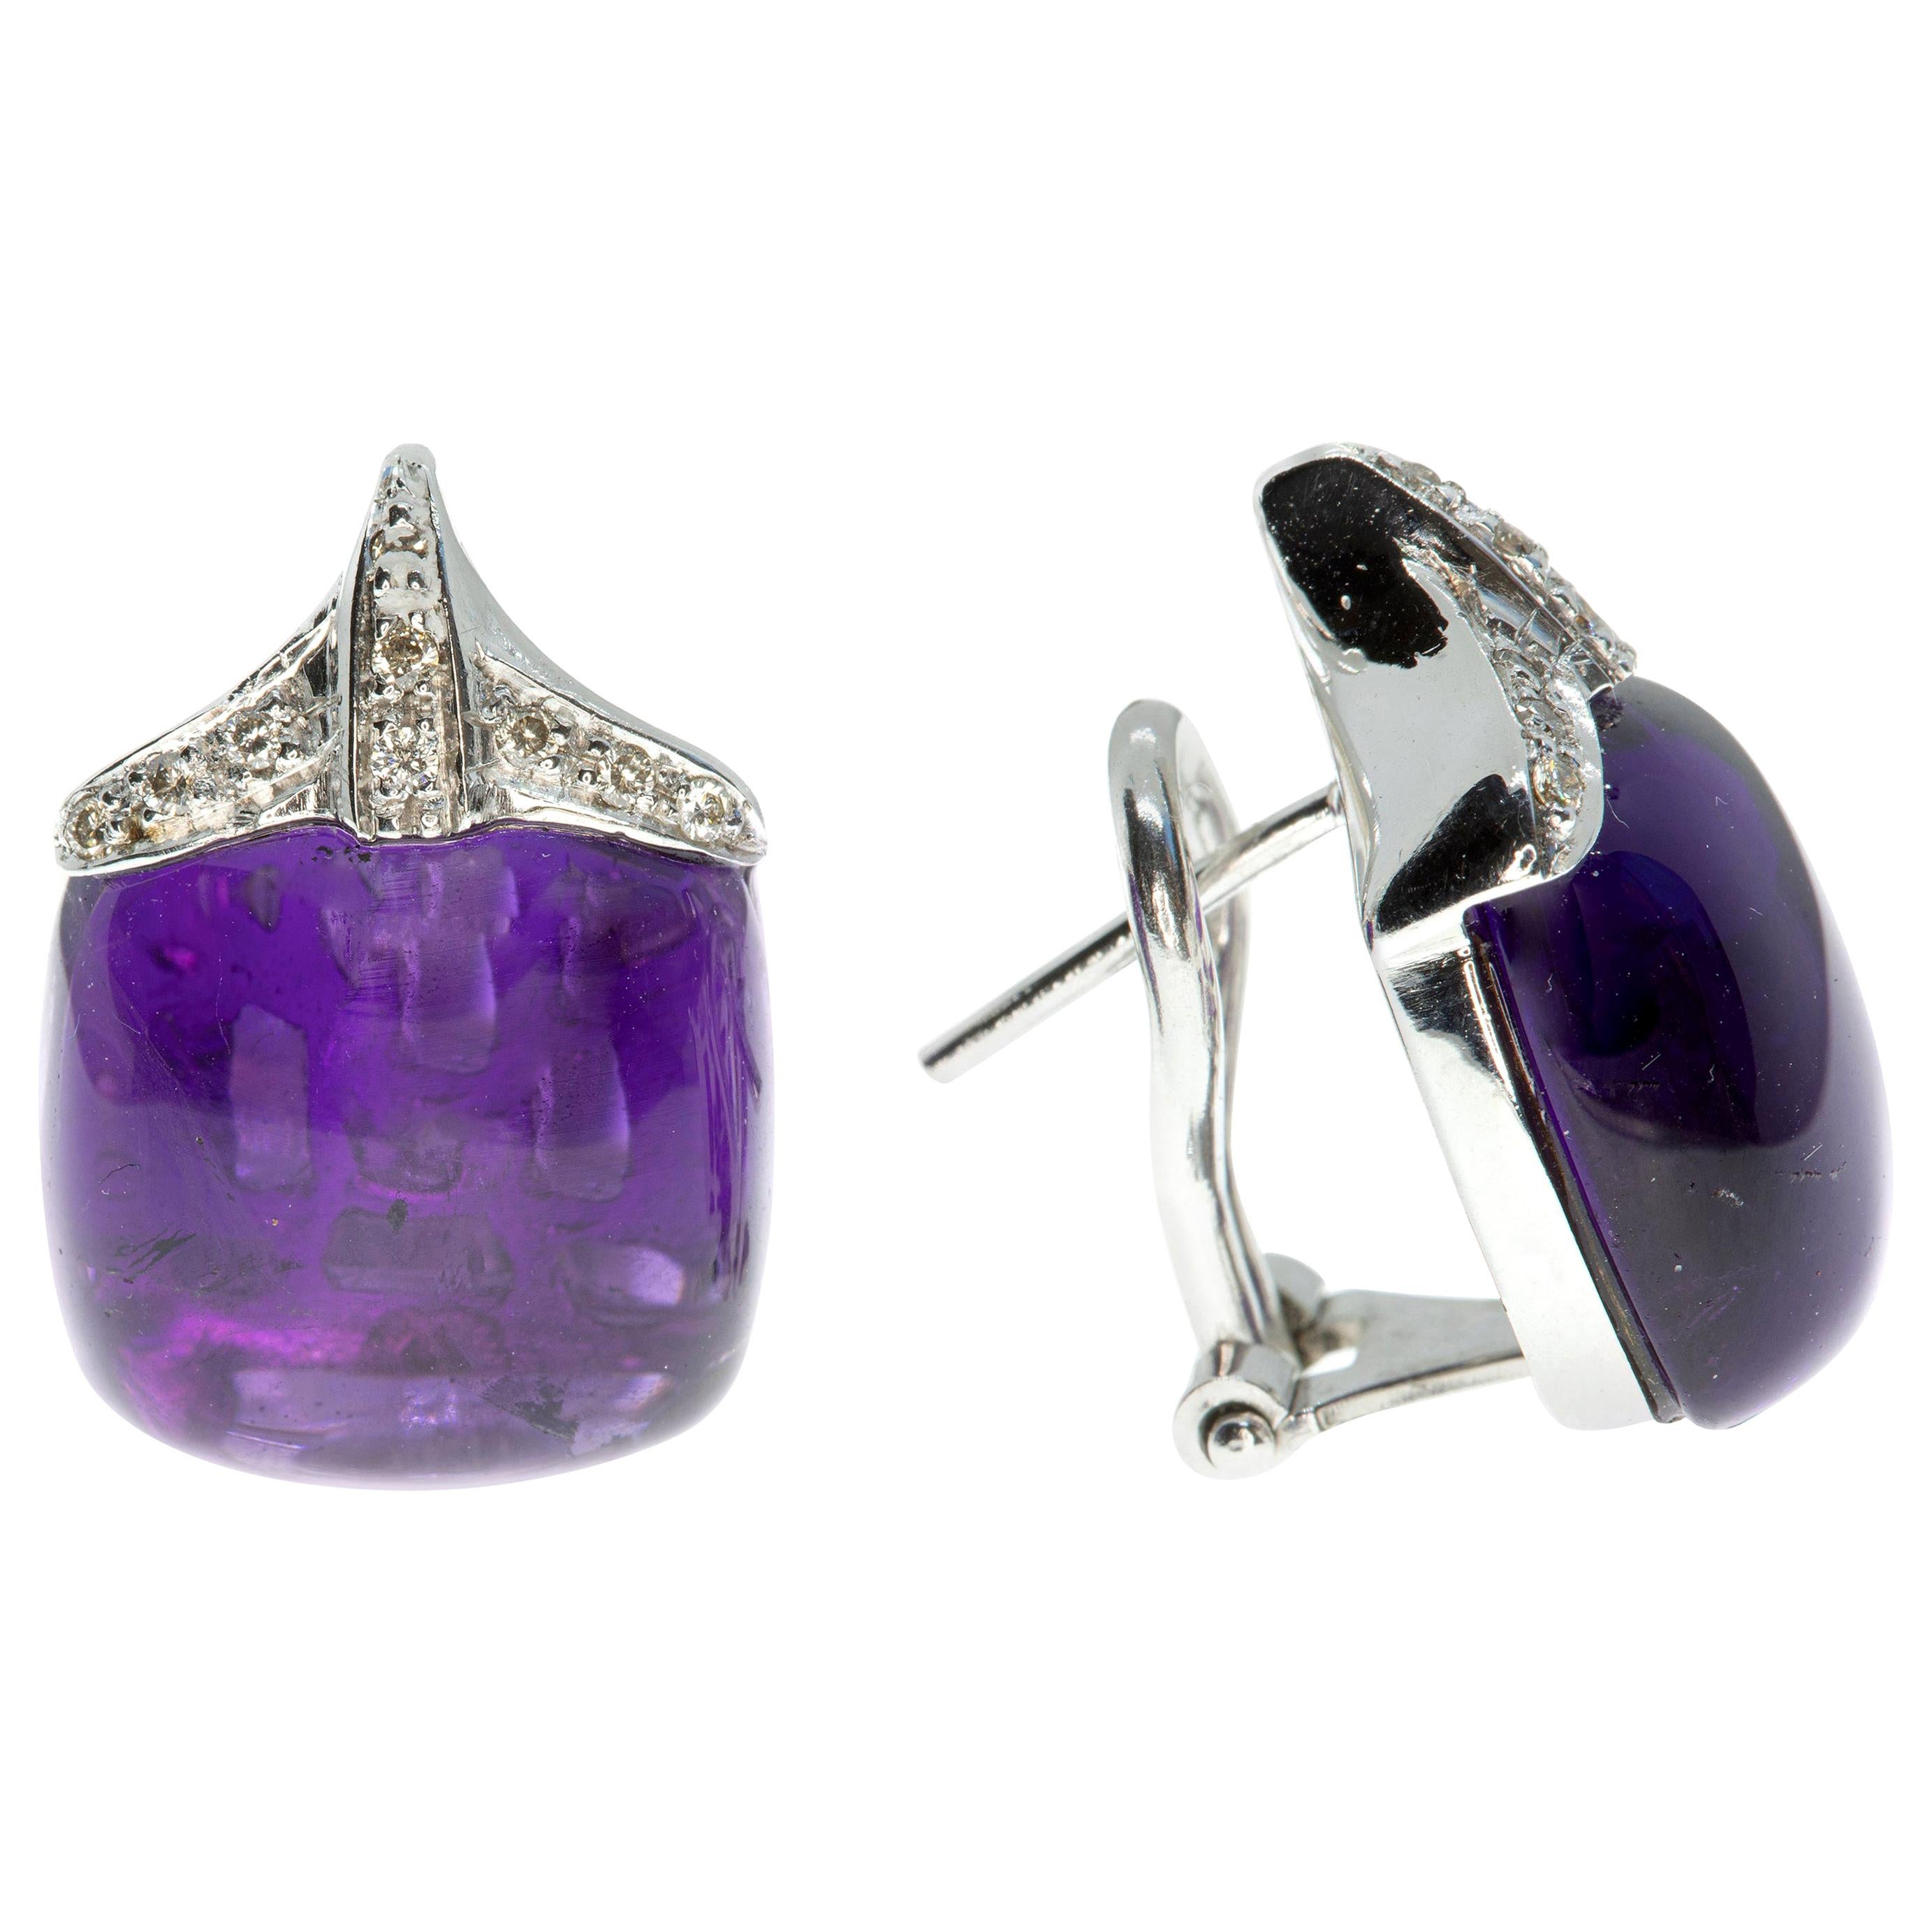 These earrings, masterfully created by hand from 18 karat white gold, each feature a large amethyst stone capped with pavé-set white diamonds.

This is a beautiful pair of earrings; exceptional to view and easy to wear. They have post-backs with